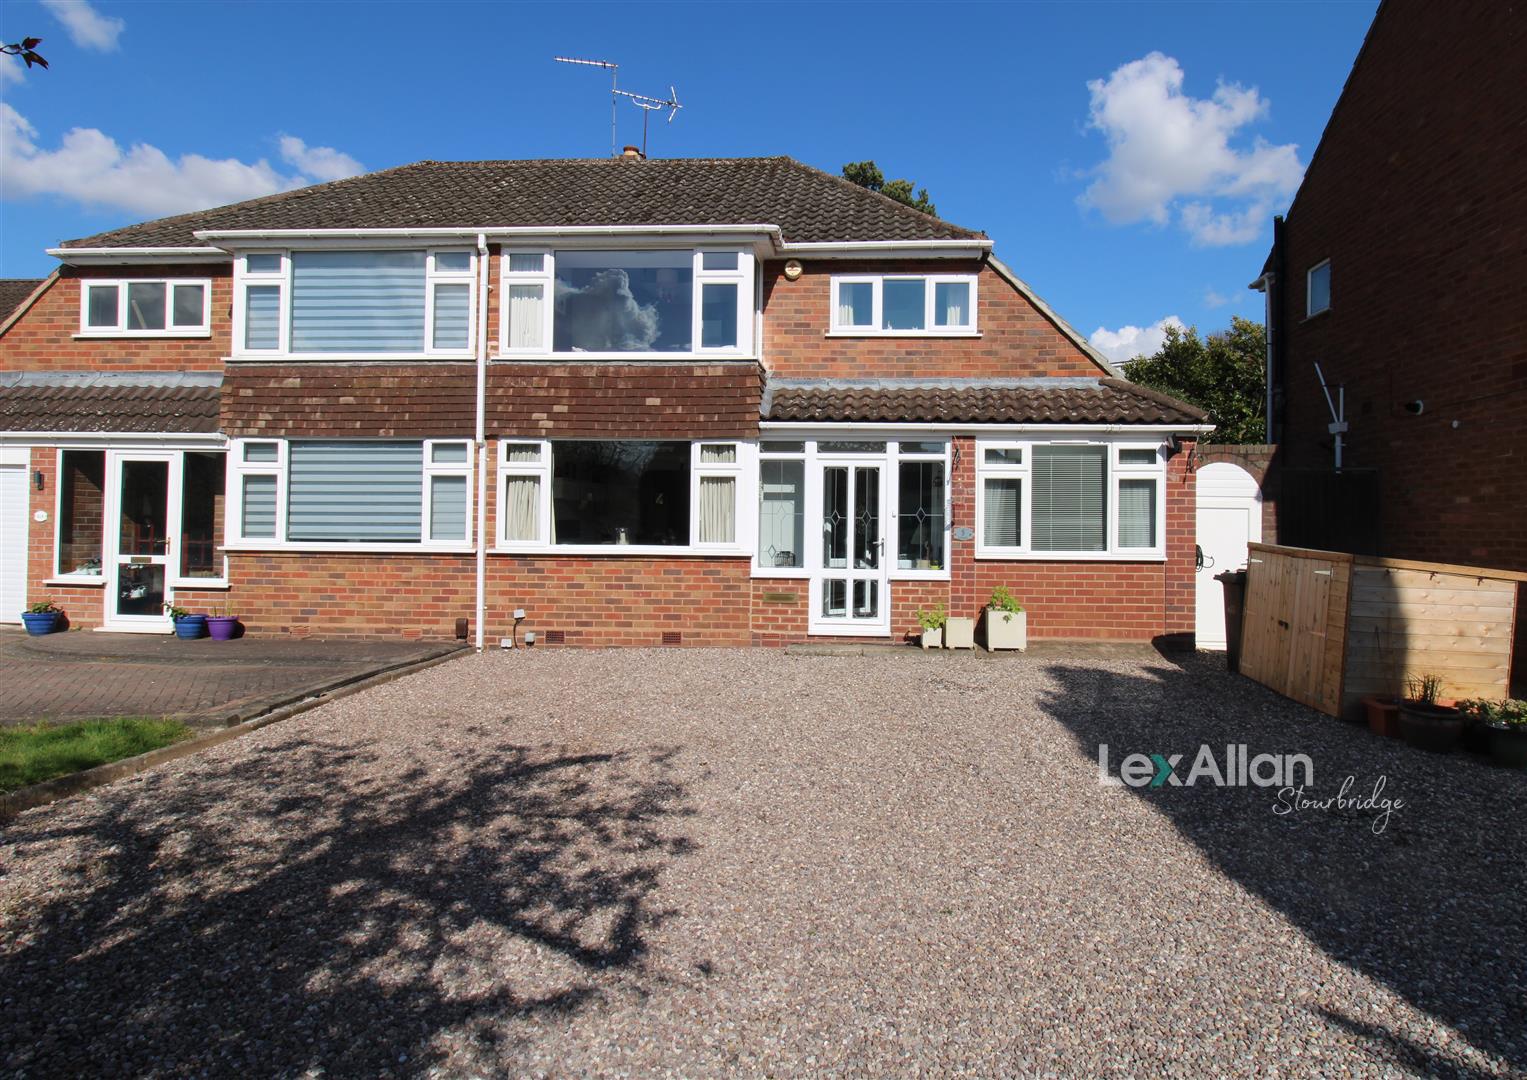 3 bed  for sale in Ash Grove, Stourbridge, DY9 